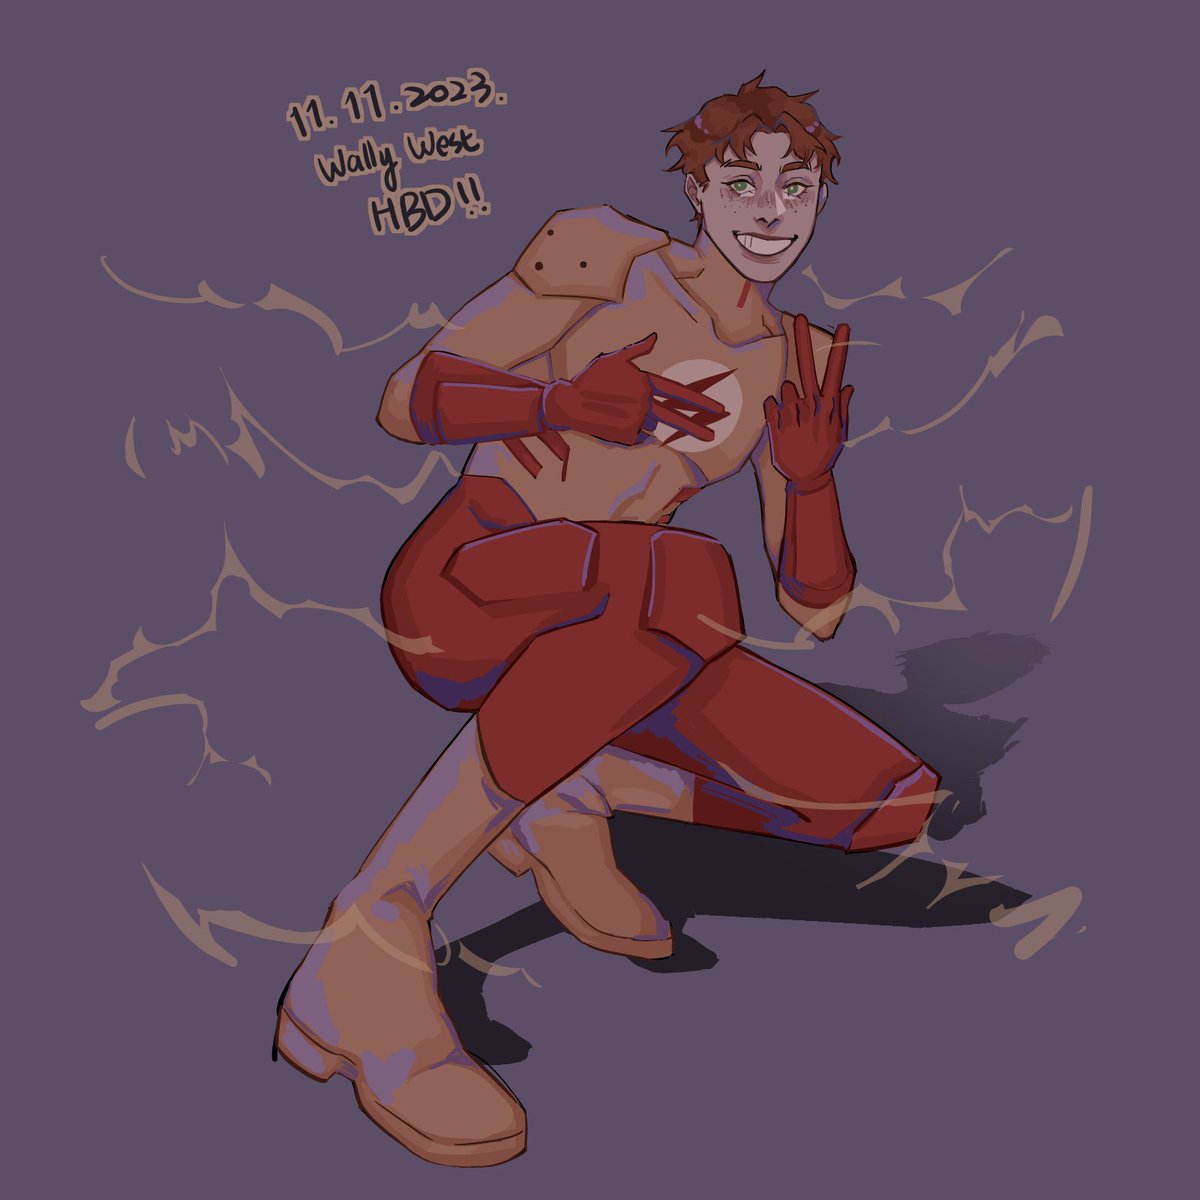 I'm late.
#WallyWest #KidFlash #YoungJustice